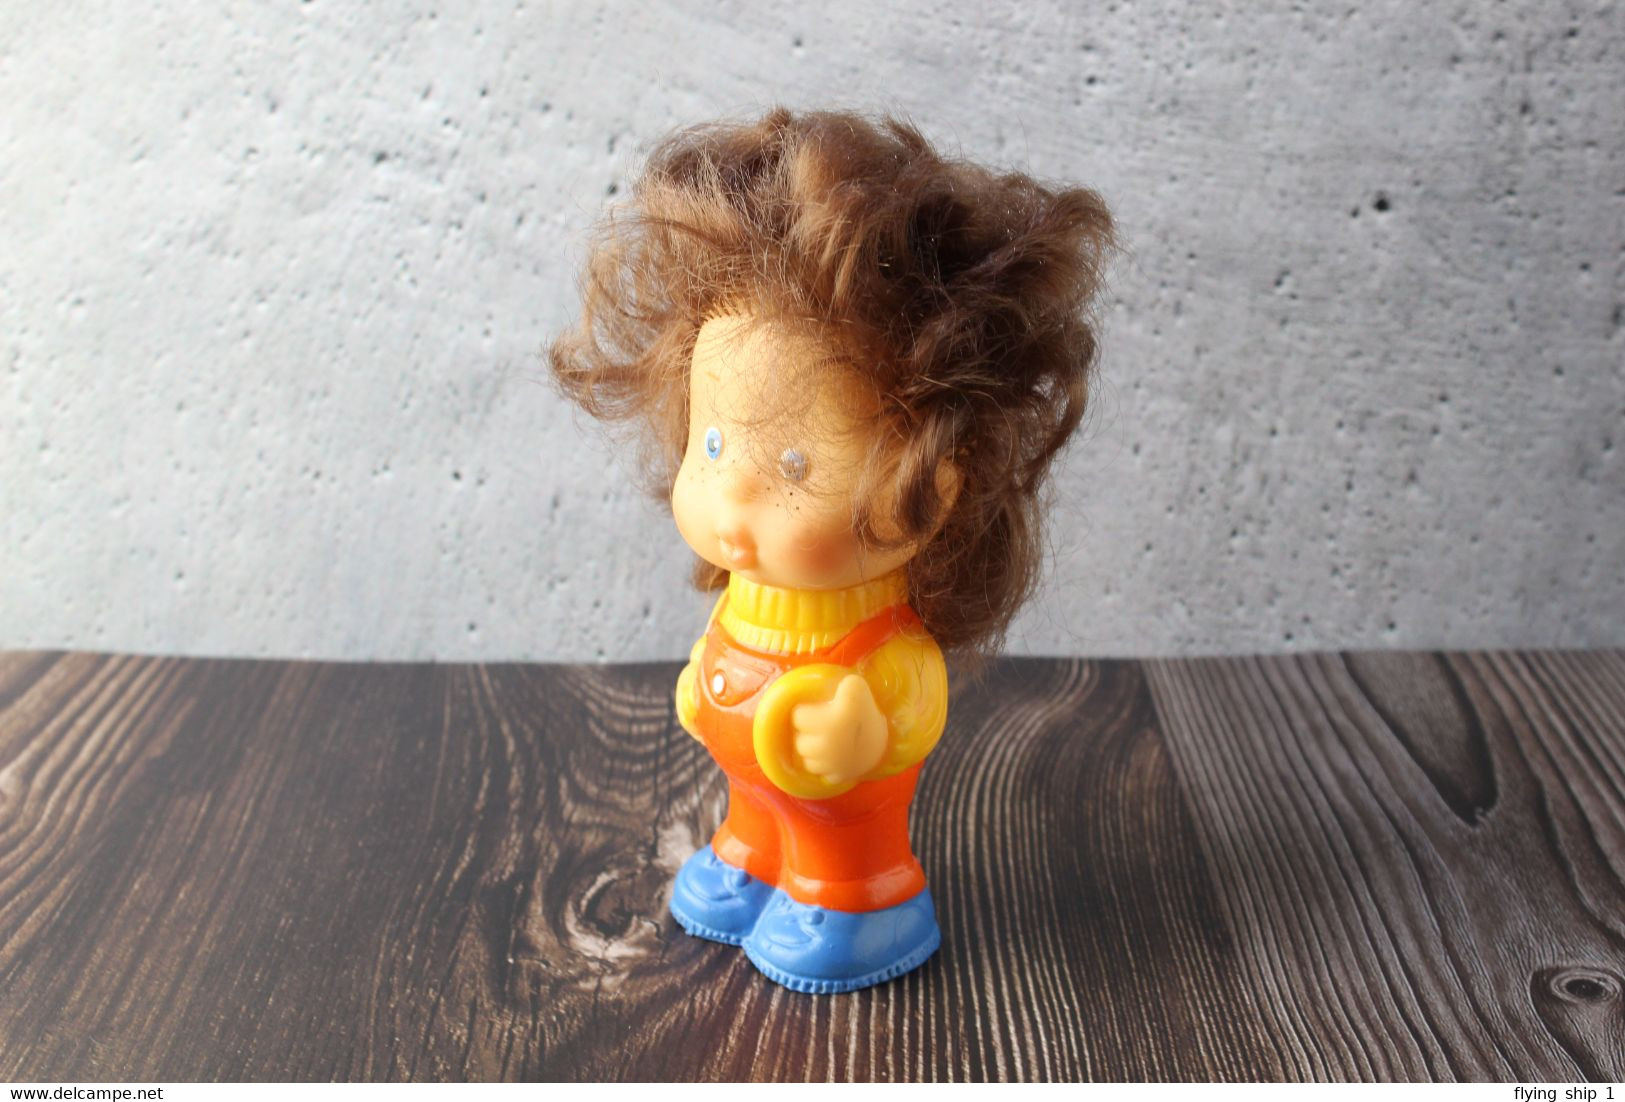 N.O.S. Best Vintage Rubber Toy USSR 1980s Soviet Toy Boy Figurine PONCHIK Brown Hair From Neznaika. Baby Doll - Peluche